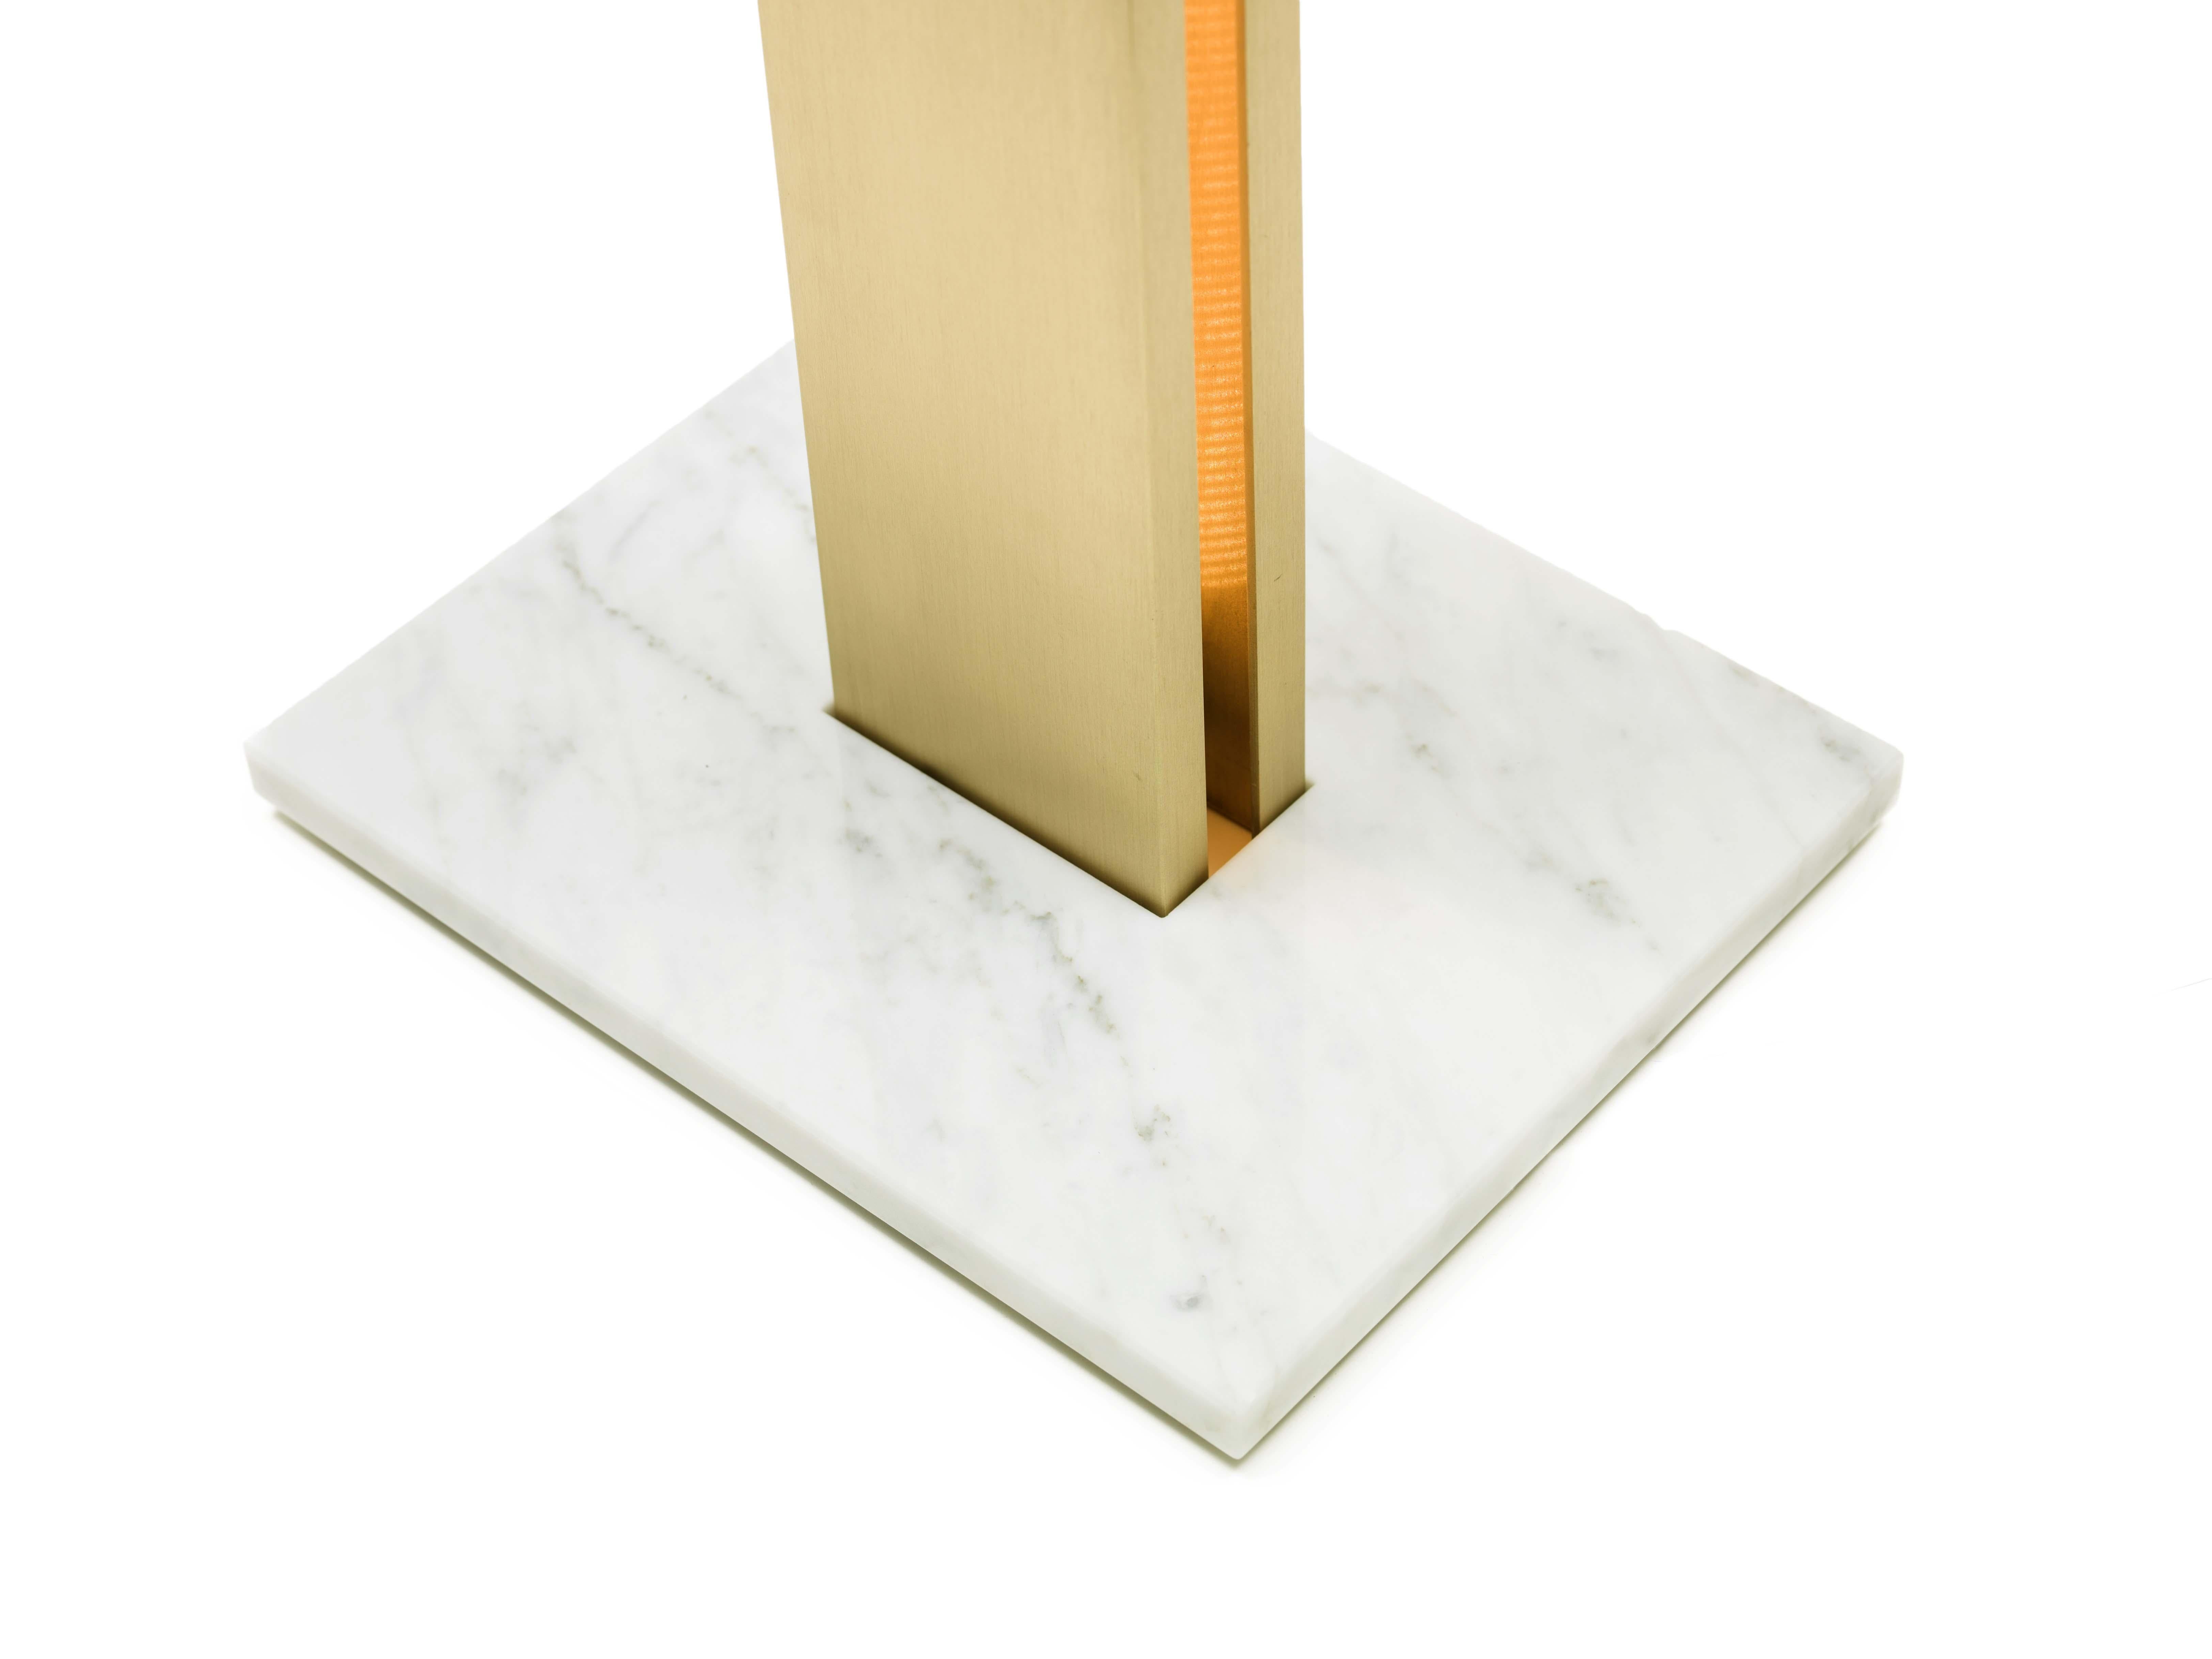 Portuguese Light Me Up Floor Lamp in brushed brass and carrara marble For Sale